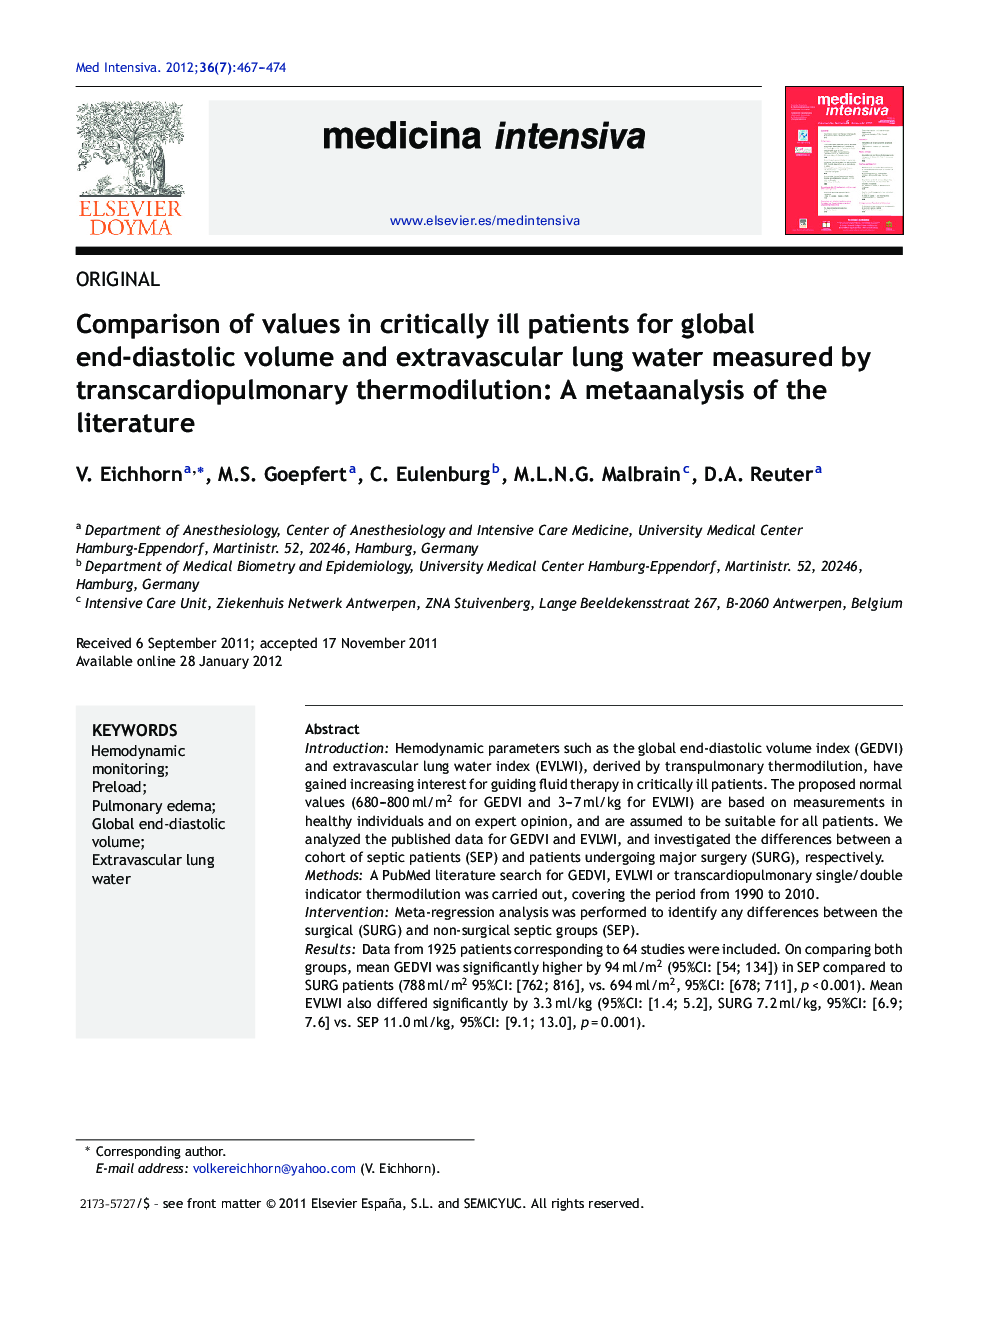 Comparison of values in critically ill patients for global end-diastolic volume and extravascular lung water measured by transcardiopulmonary thermodilution: A metaanalysis of the literature